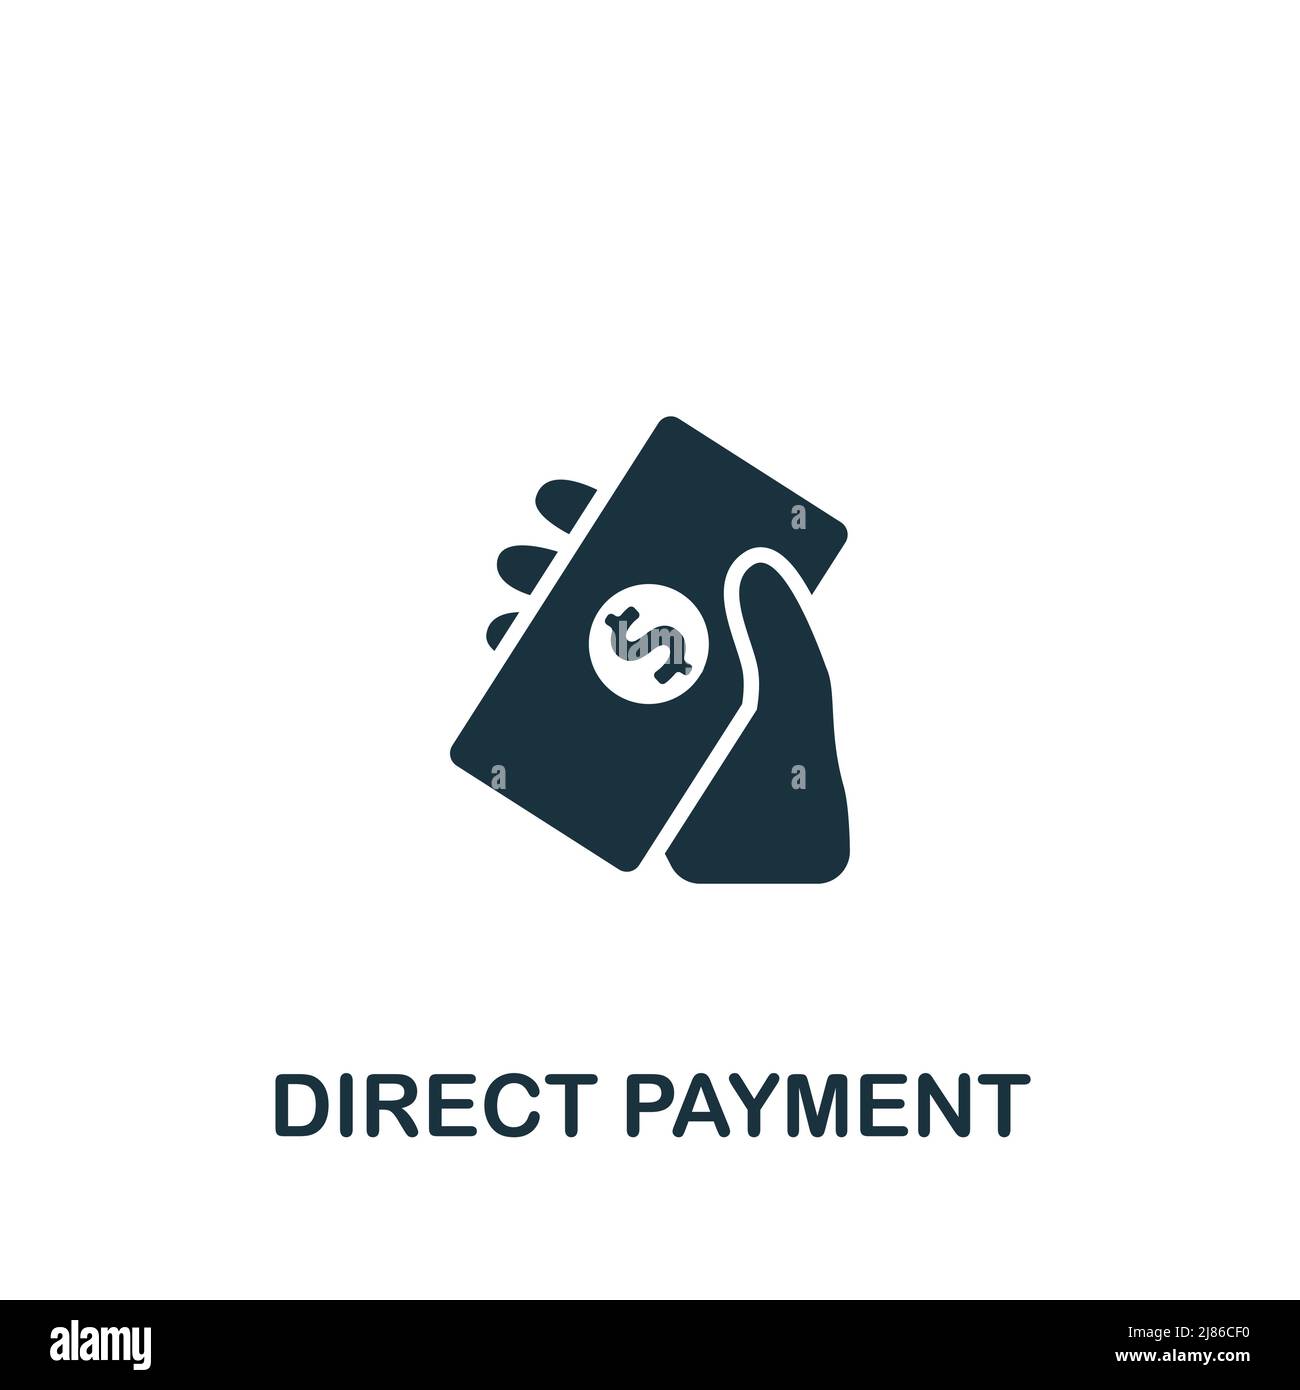 Direct Payment icon. Monochrome simple Fintech Industry icon for templates, web design and infographics Stock Vector